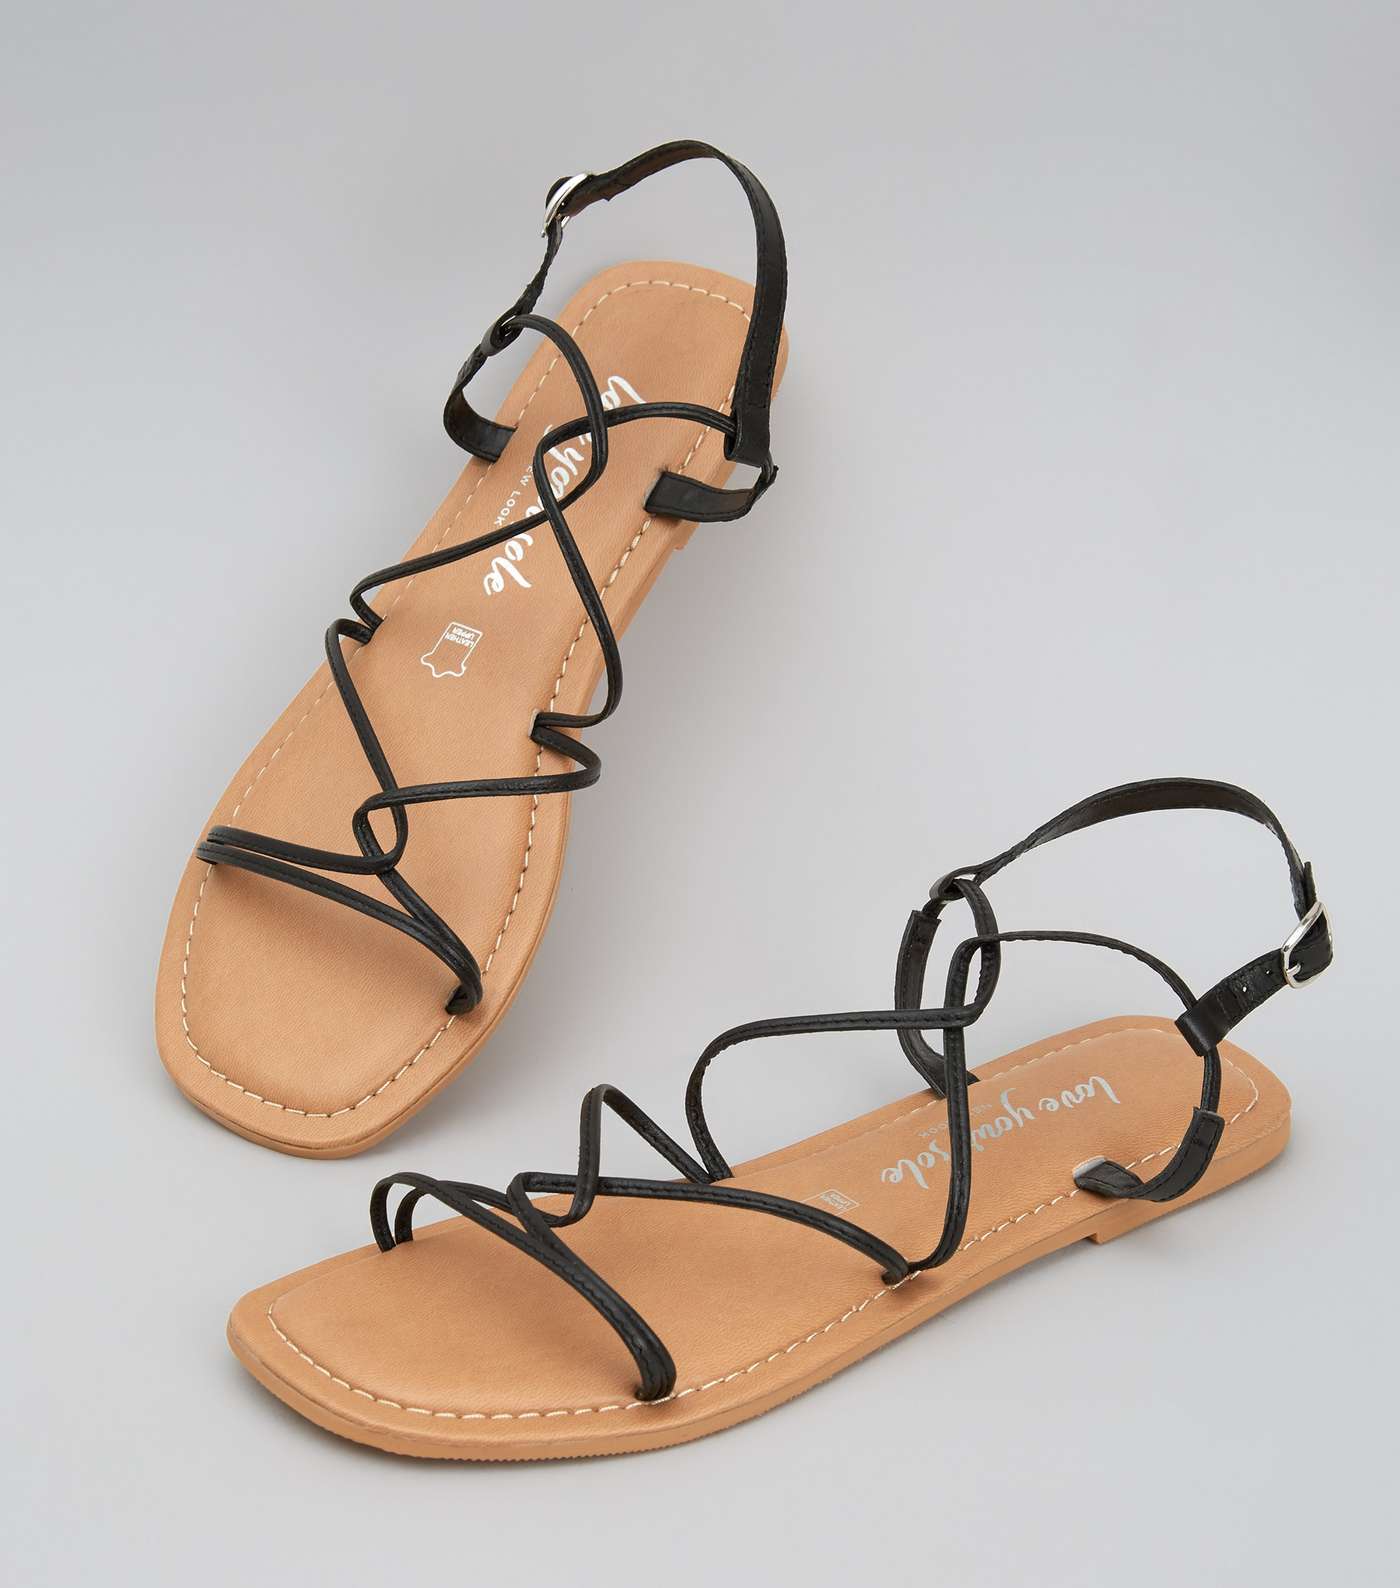 Black Leather Strappy Flat Sandals Image 4